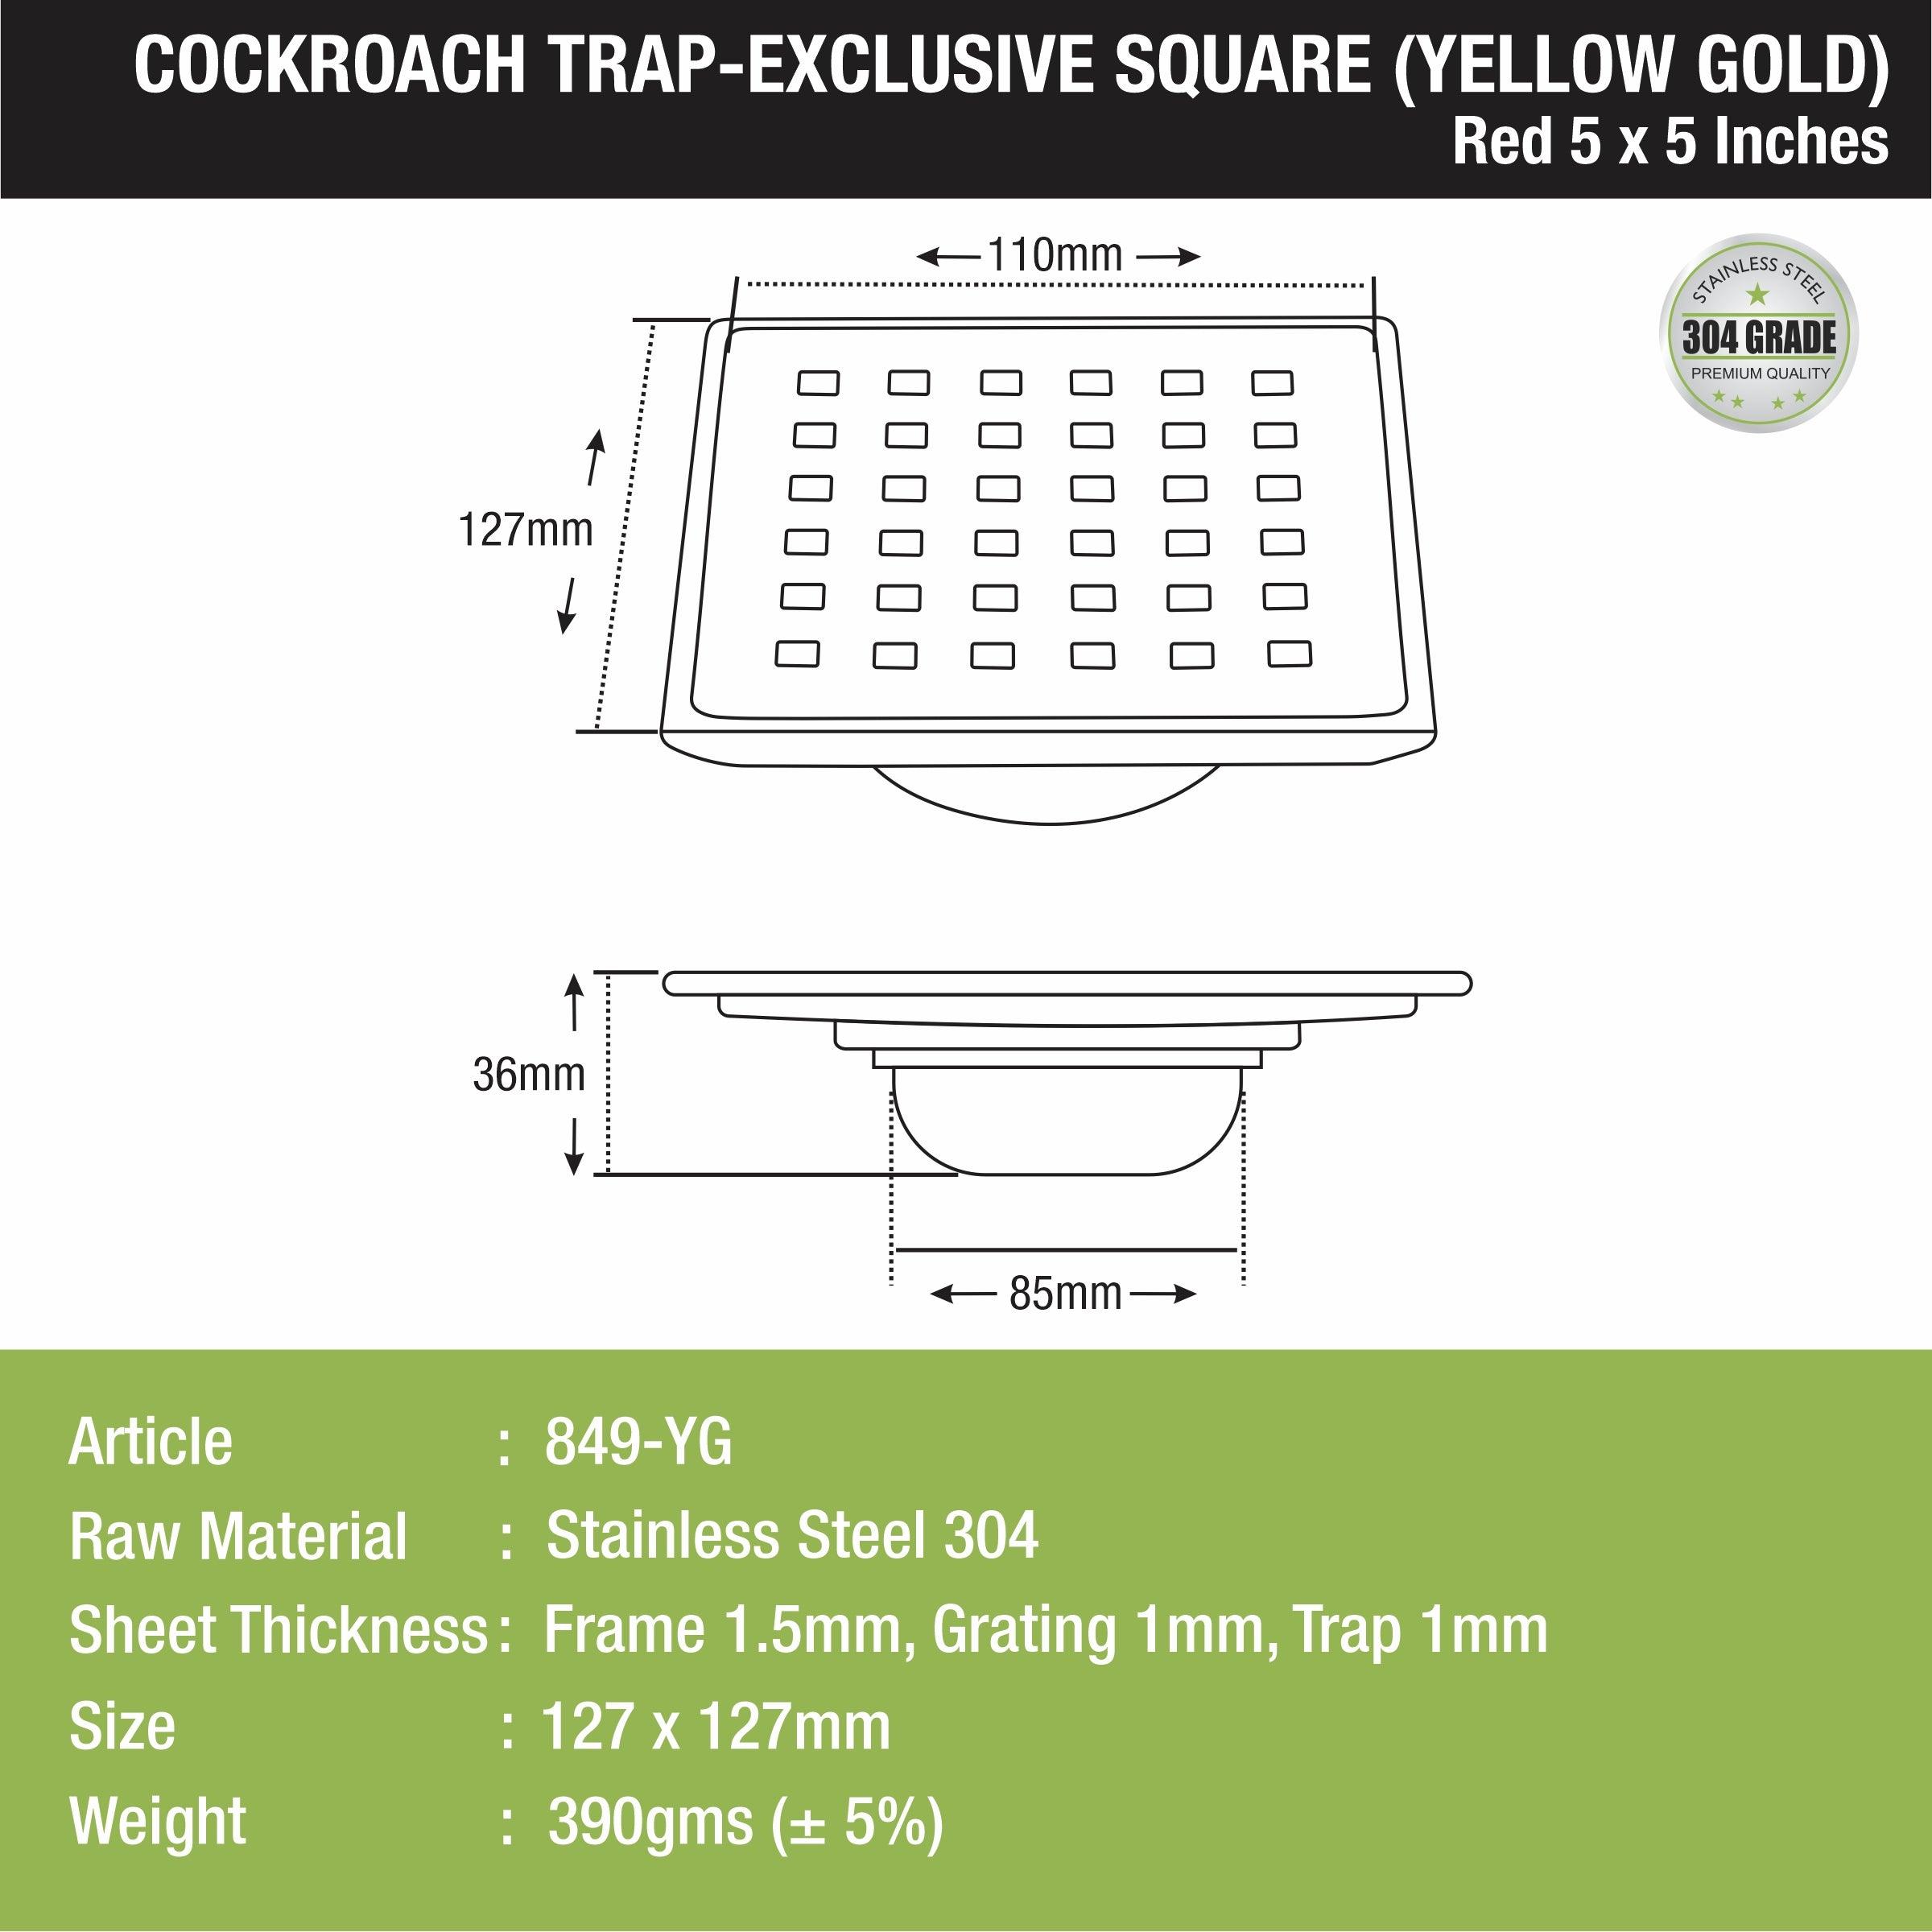 Red Exclusive Square Floor Drain in Yellow Gold PVD Coating (5 x 5 Inches) with Cockroach Trap - LIPKA - Lipka Home